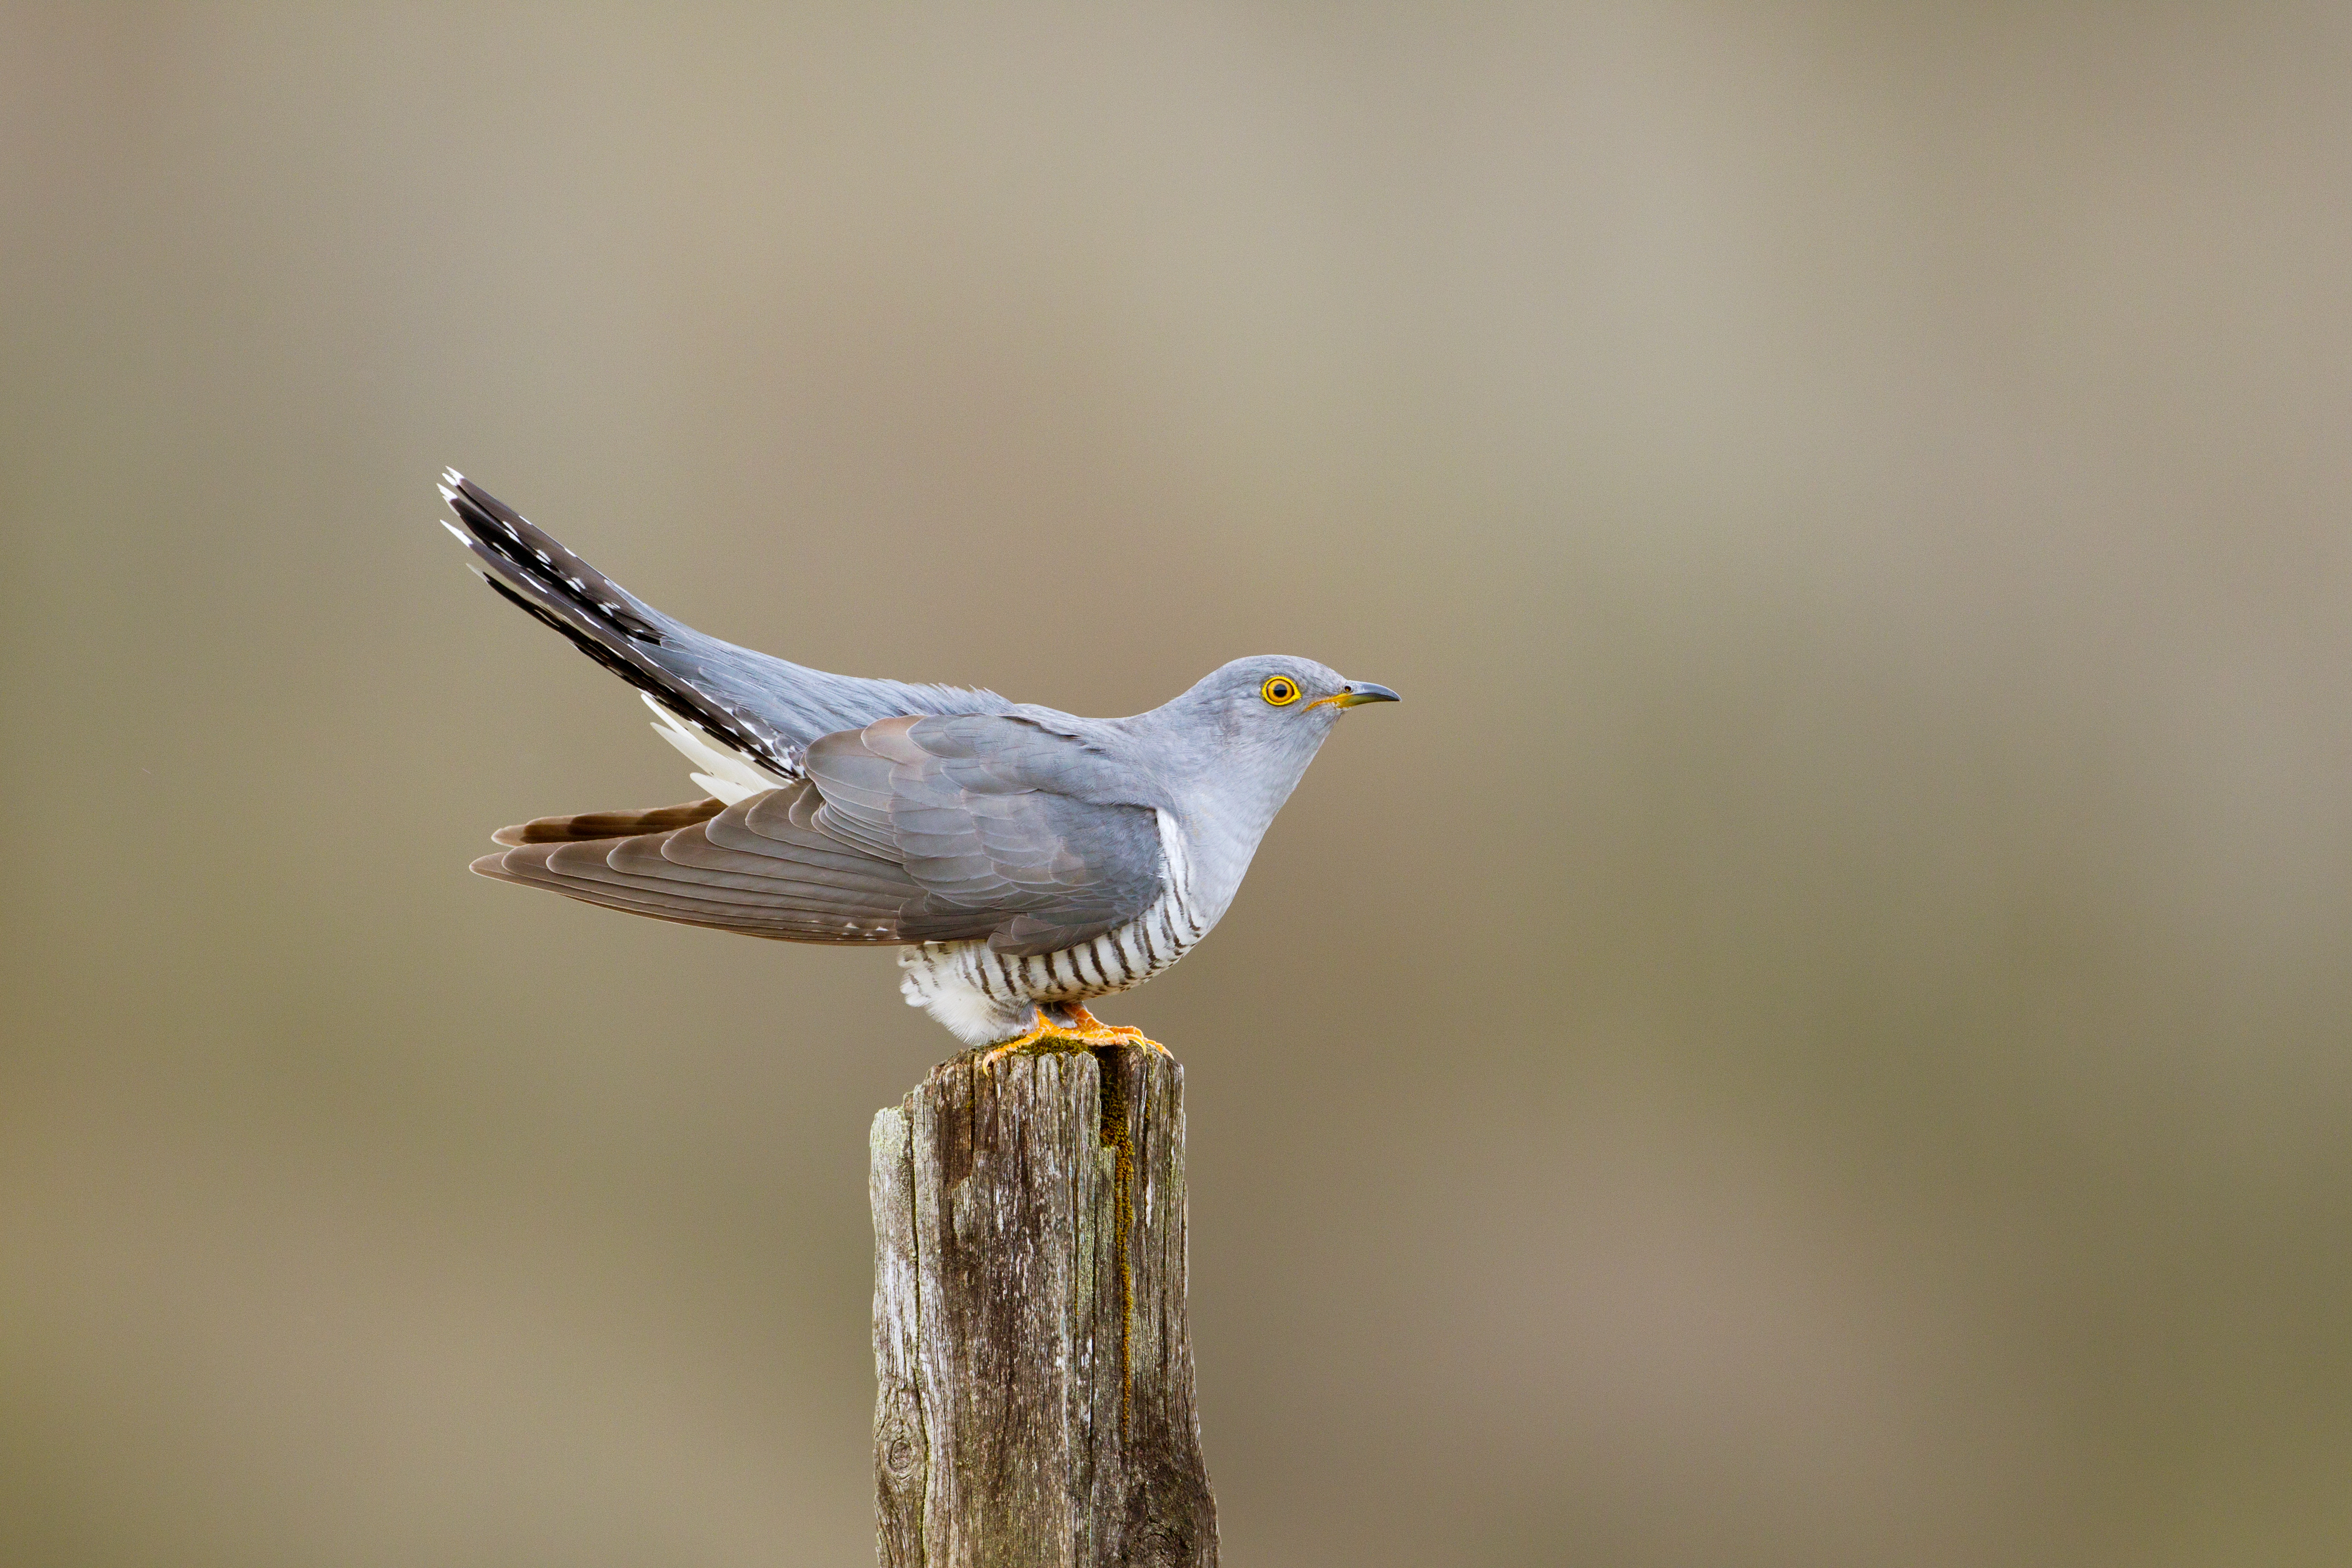 A cuckoo, a species whose numbers have declined significantly in recent years (Edmund Fellowes/BTO/PA)